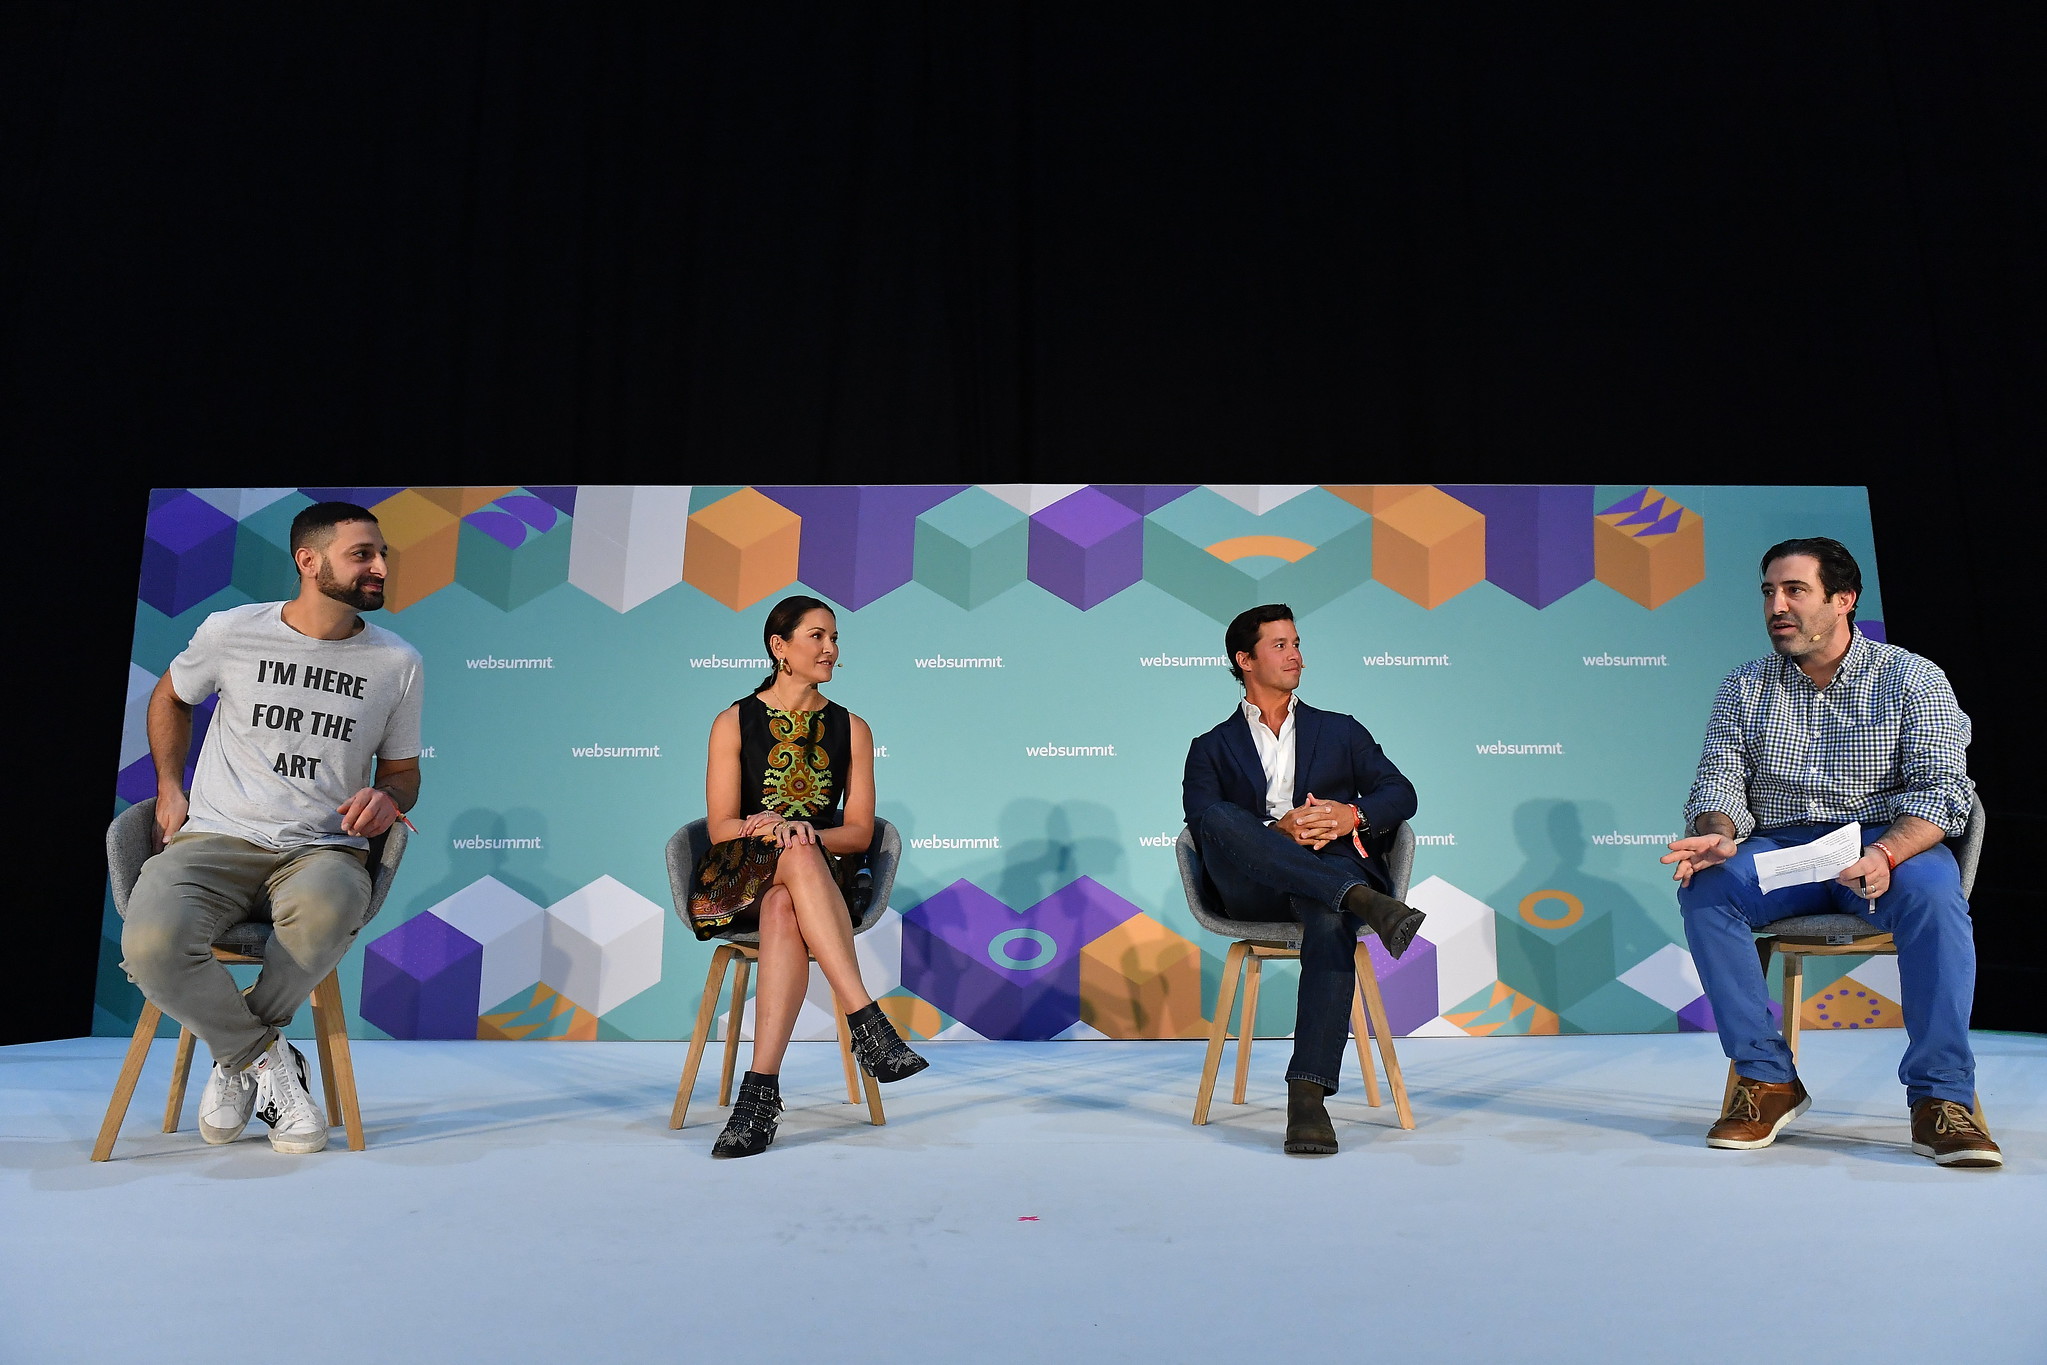 A photograph of four people speaking on stage at Web Summit. They are seated and appear to be having a discussion.